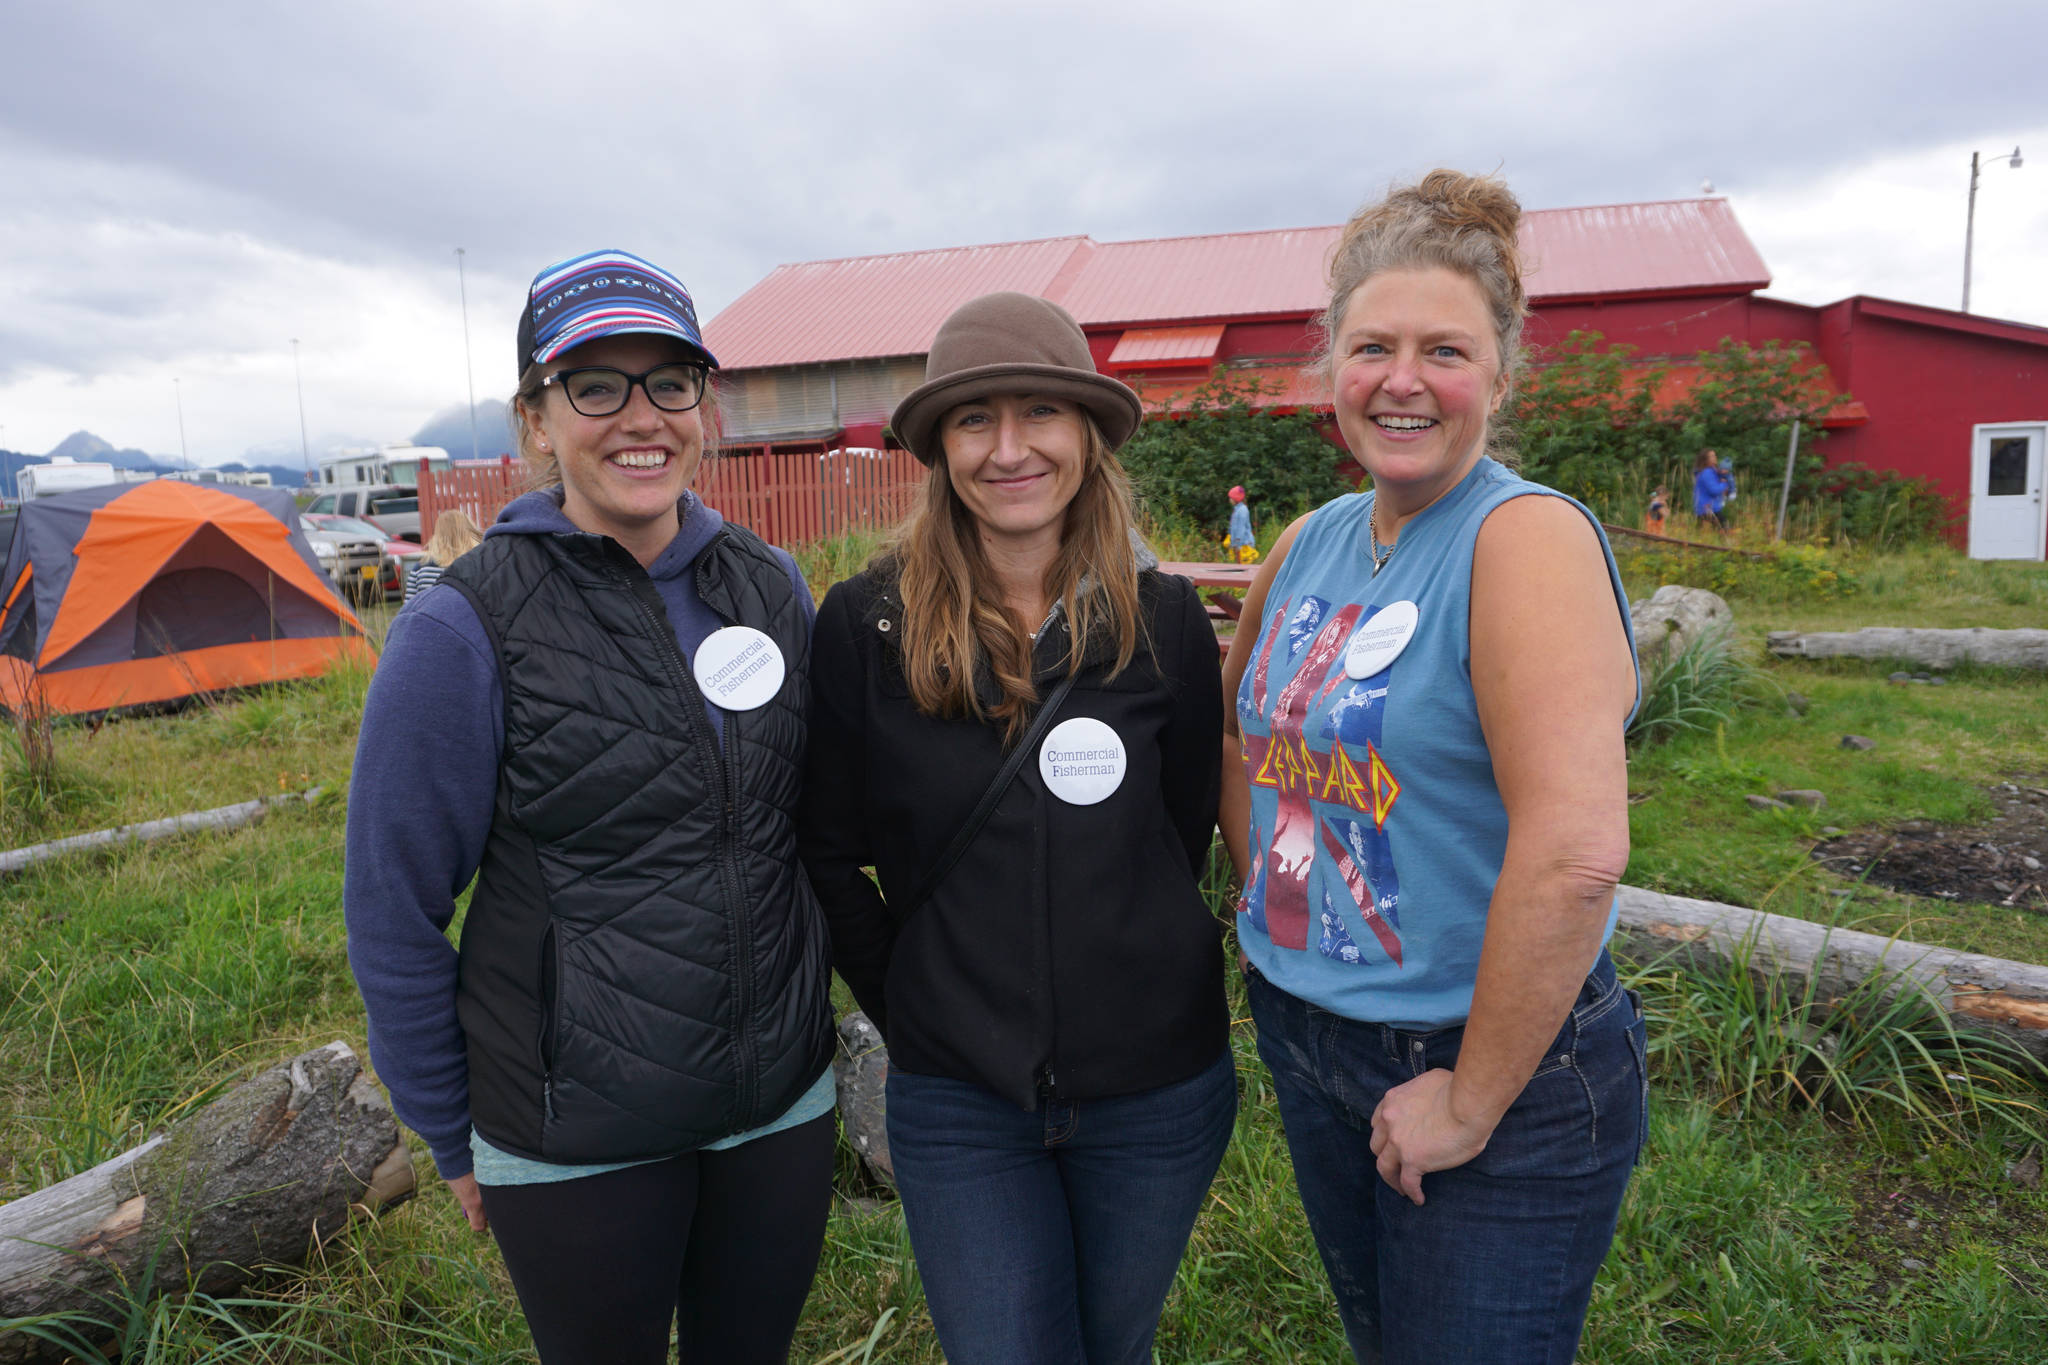 From left to right, Jessie Turner, Lacey Velsko and Renee Alward represent the commercial fishing industry at the North Pacific Fisheries Association Fish Fry last Saturday, Sept. 2, 2017 at the Kachemak Bay Wooden Boat Society festival on the Homer Spit. (Photo by Michael Armstrong, Homer News)